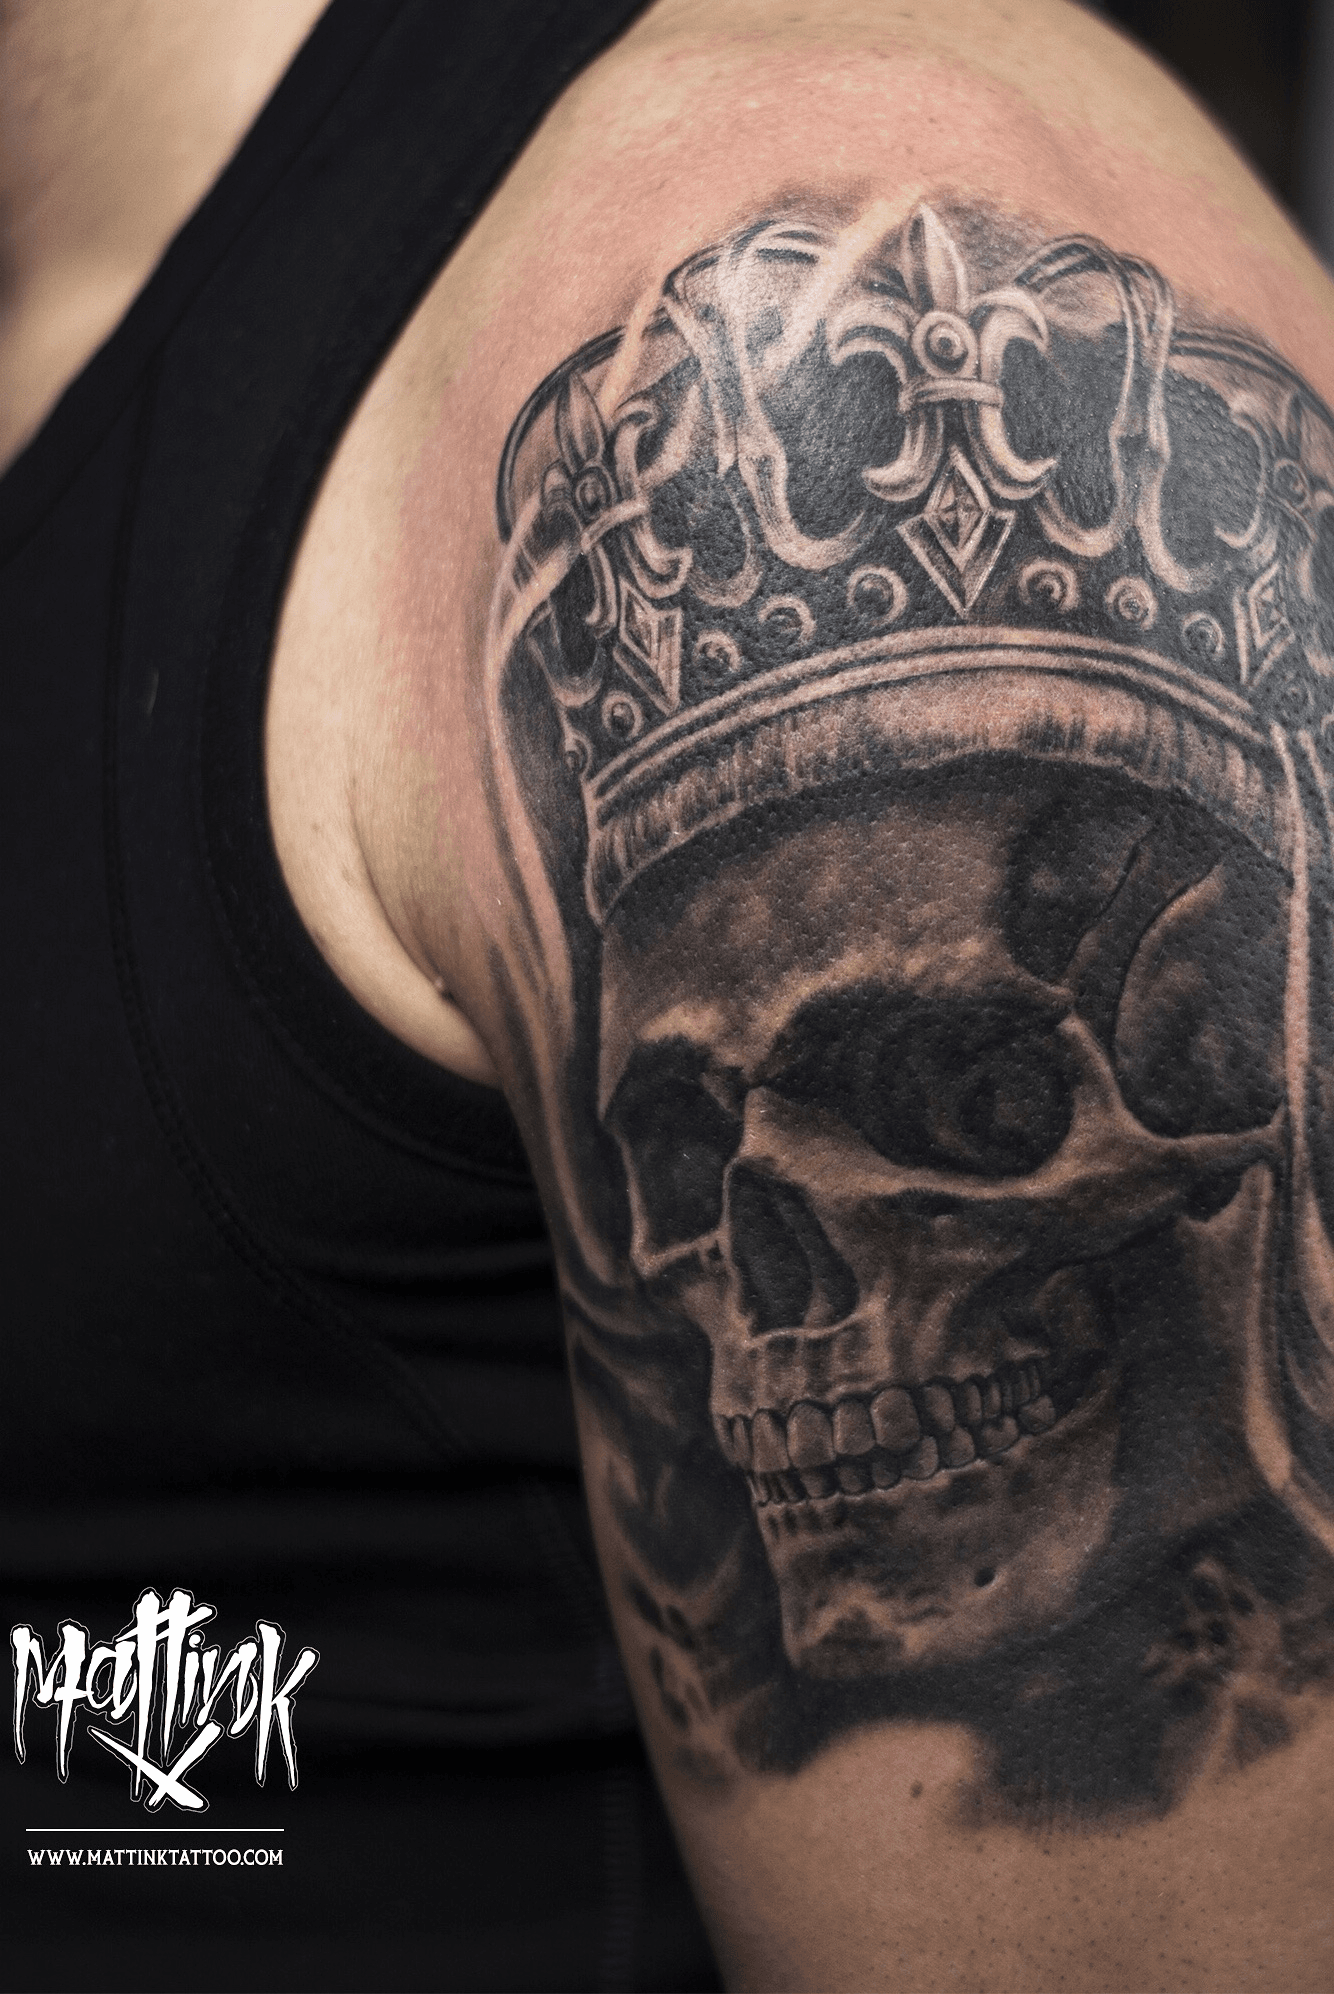 Human skull with wings and crown for tattoo design